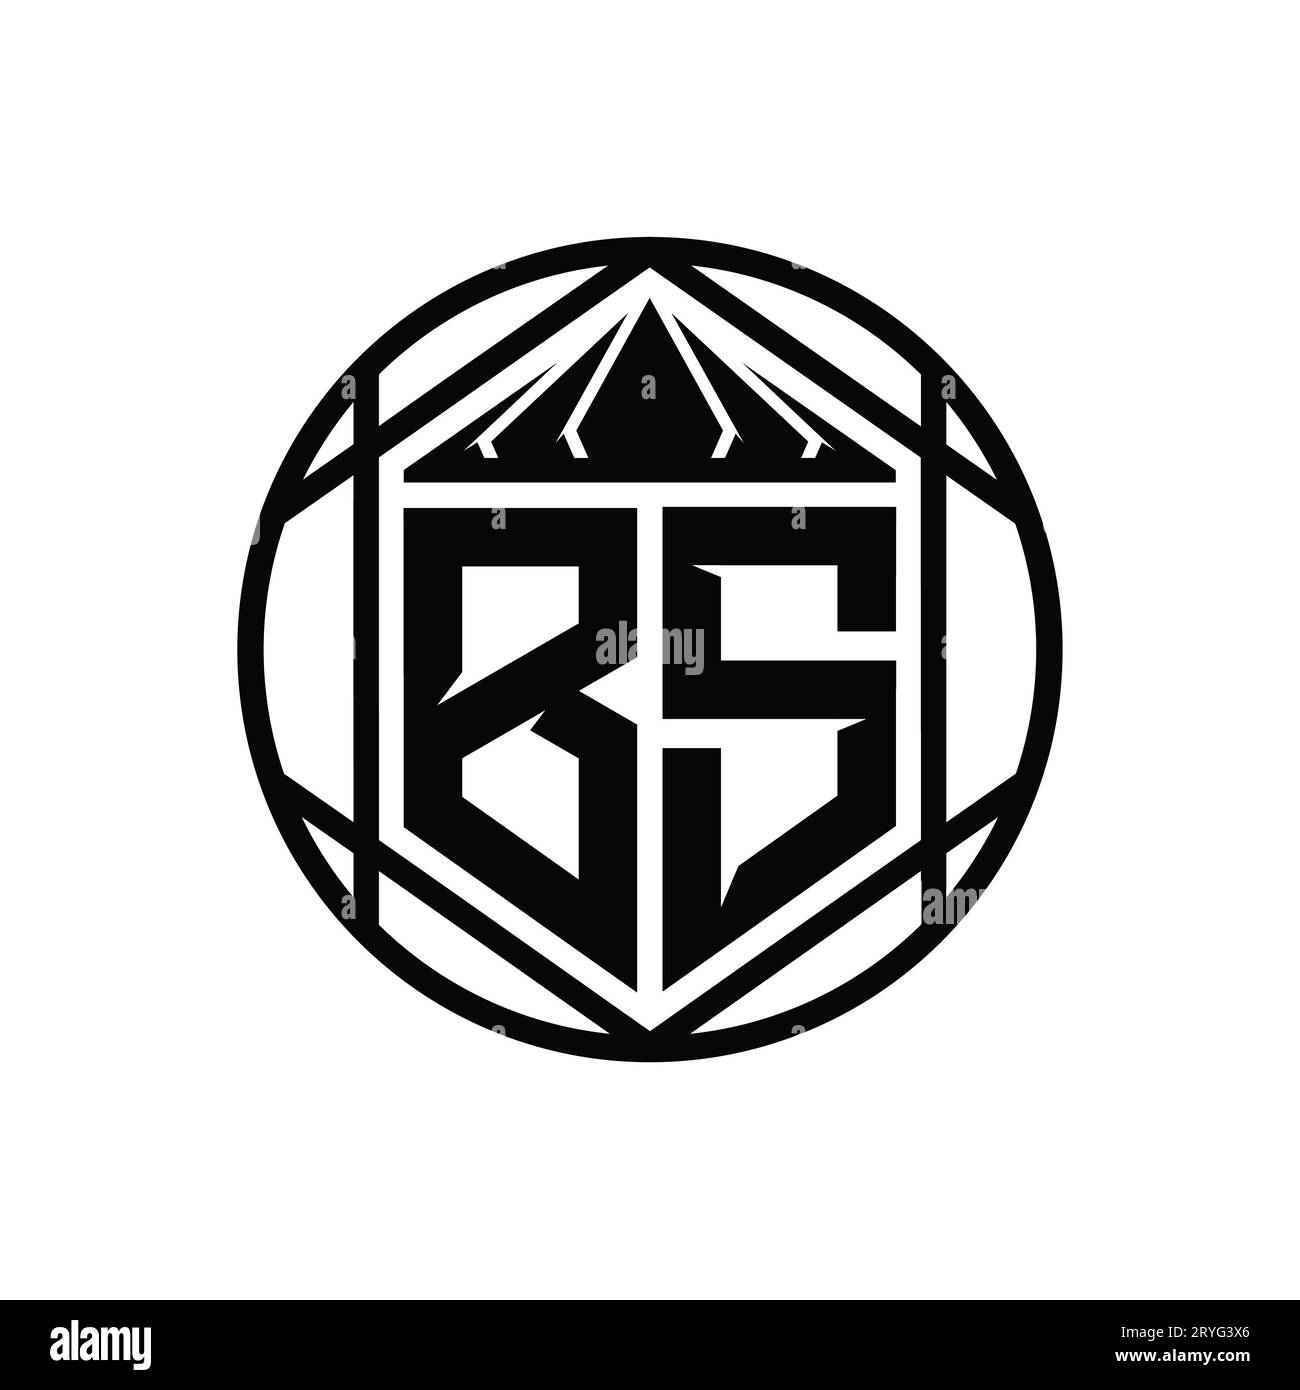 BS Letter Logo monogram hexagon slice crown sharp shield shape isolated circle abstract style design template Stock Photo